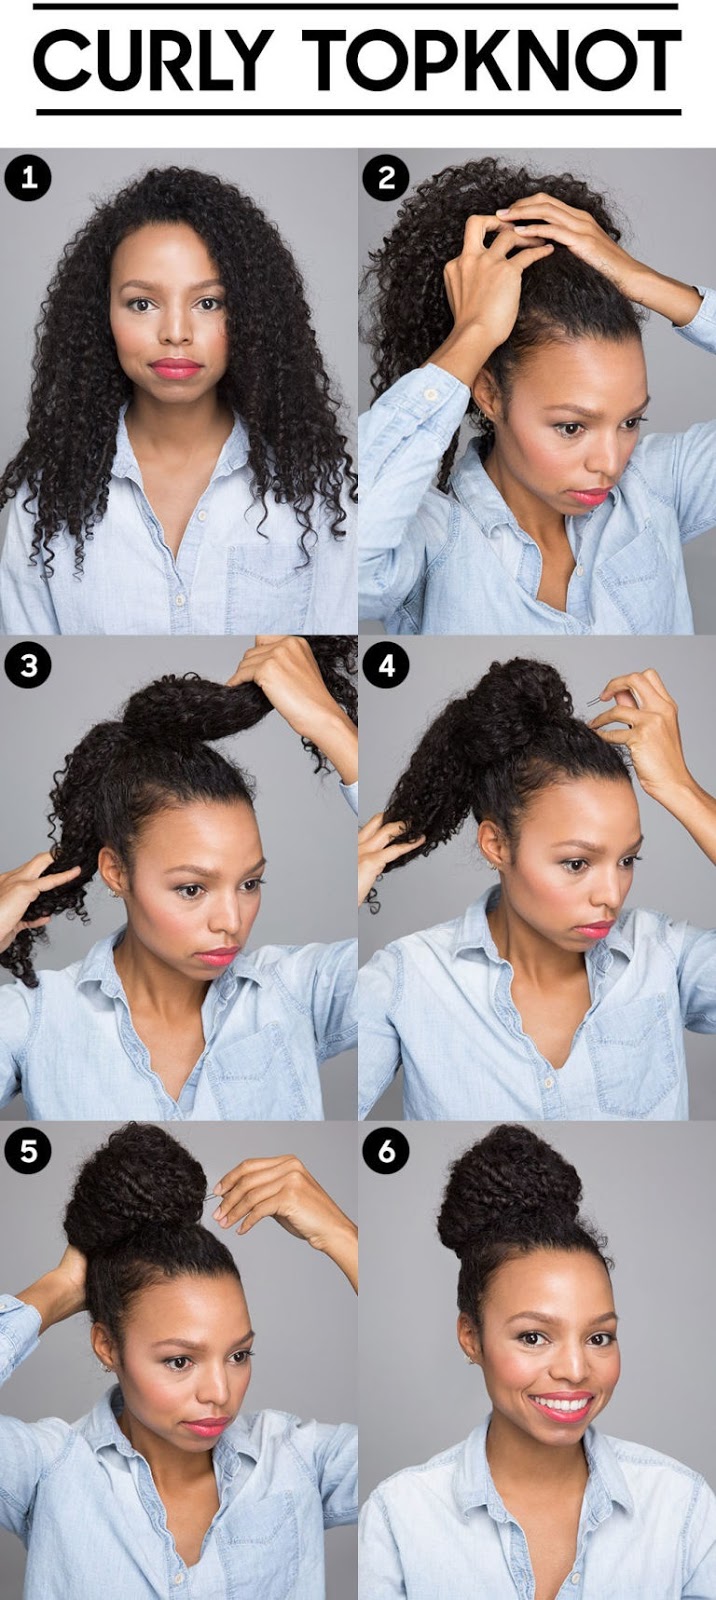 Topknot for curly hair 